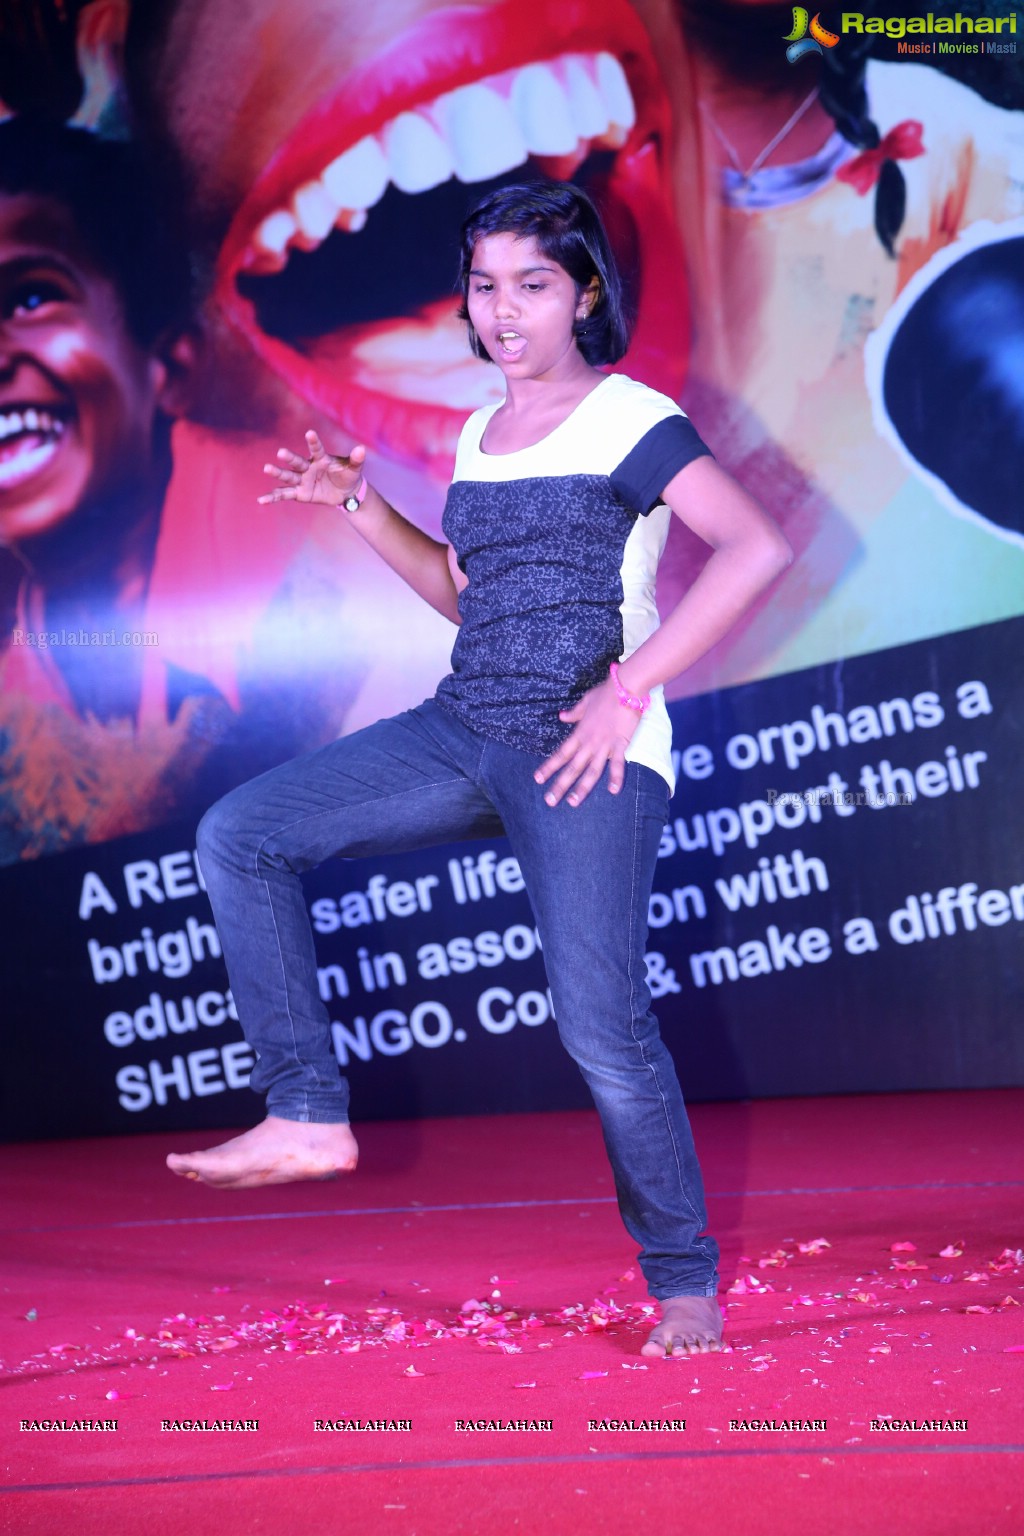 Spread a Smile Event by 93.5 Red FM, Hyderabad